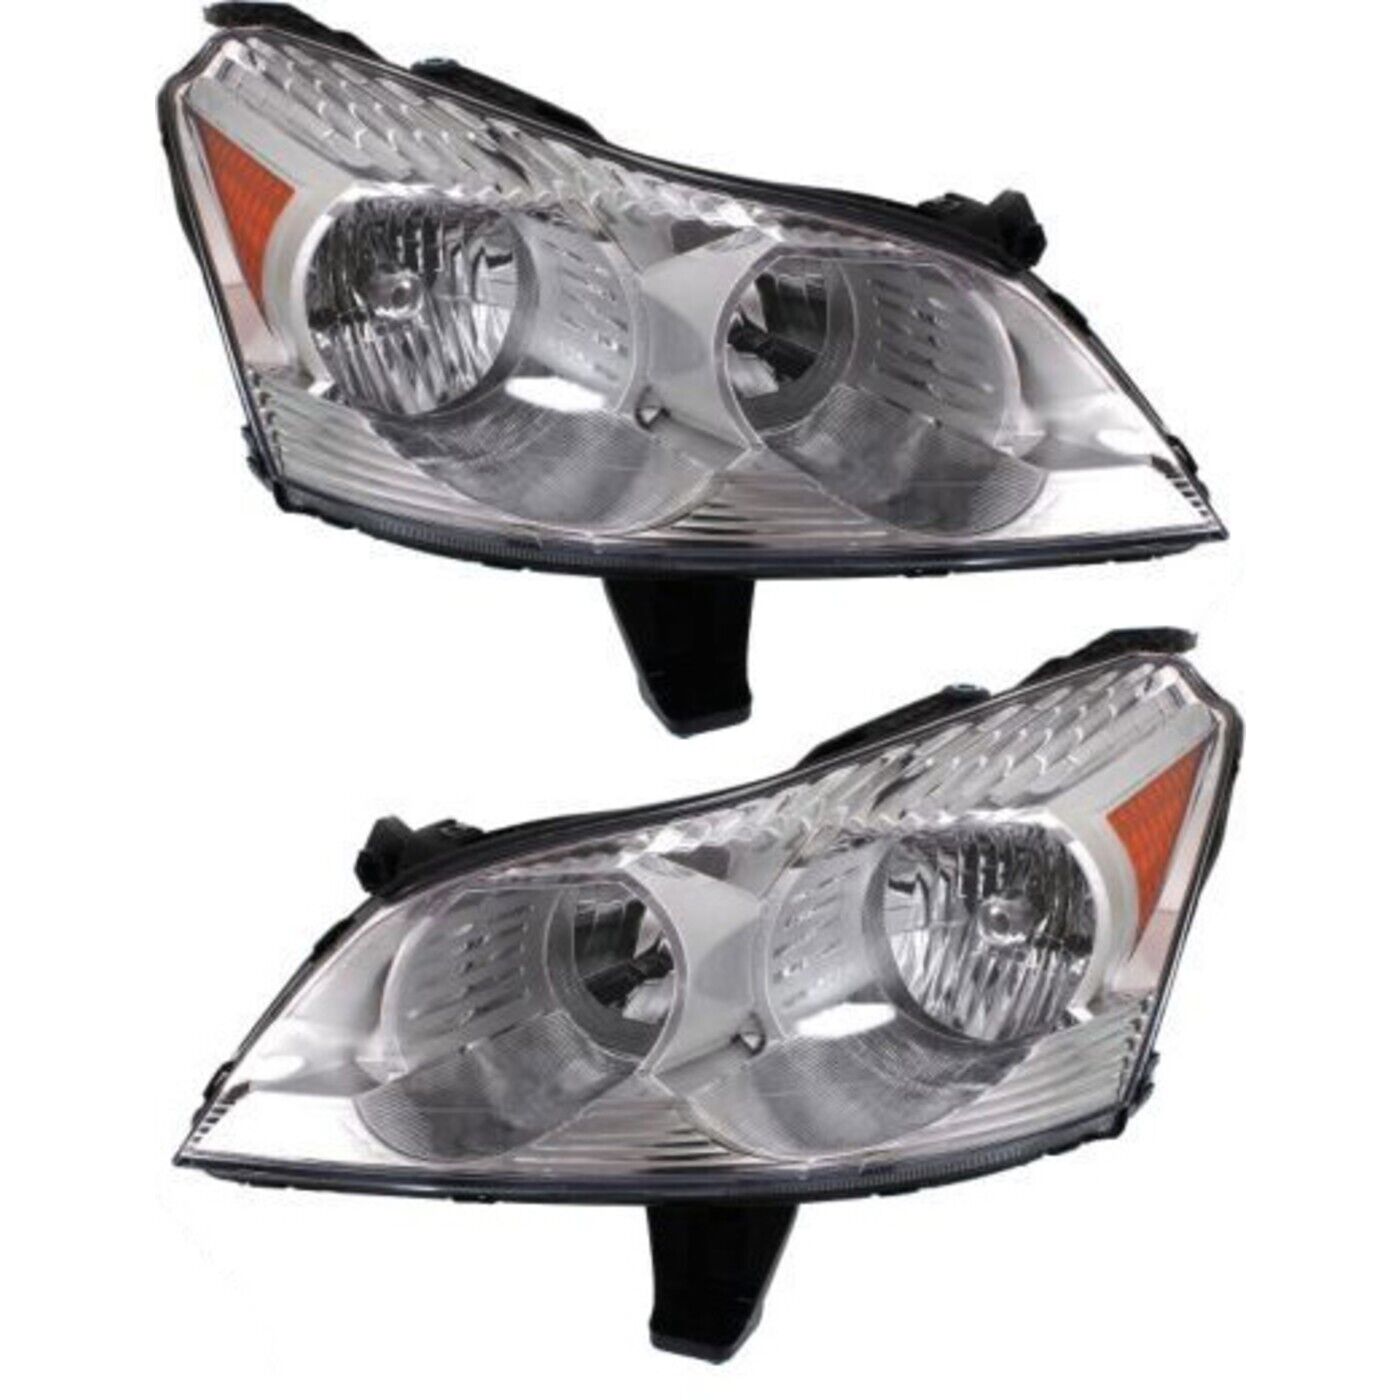 Headlight Assembly Set For 2009-2012 Chevrolet Traverse Left and Right With Bulb